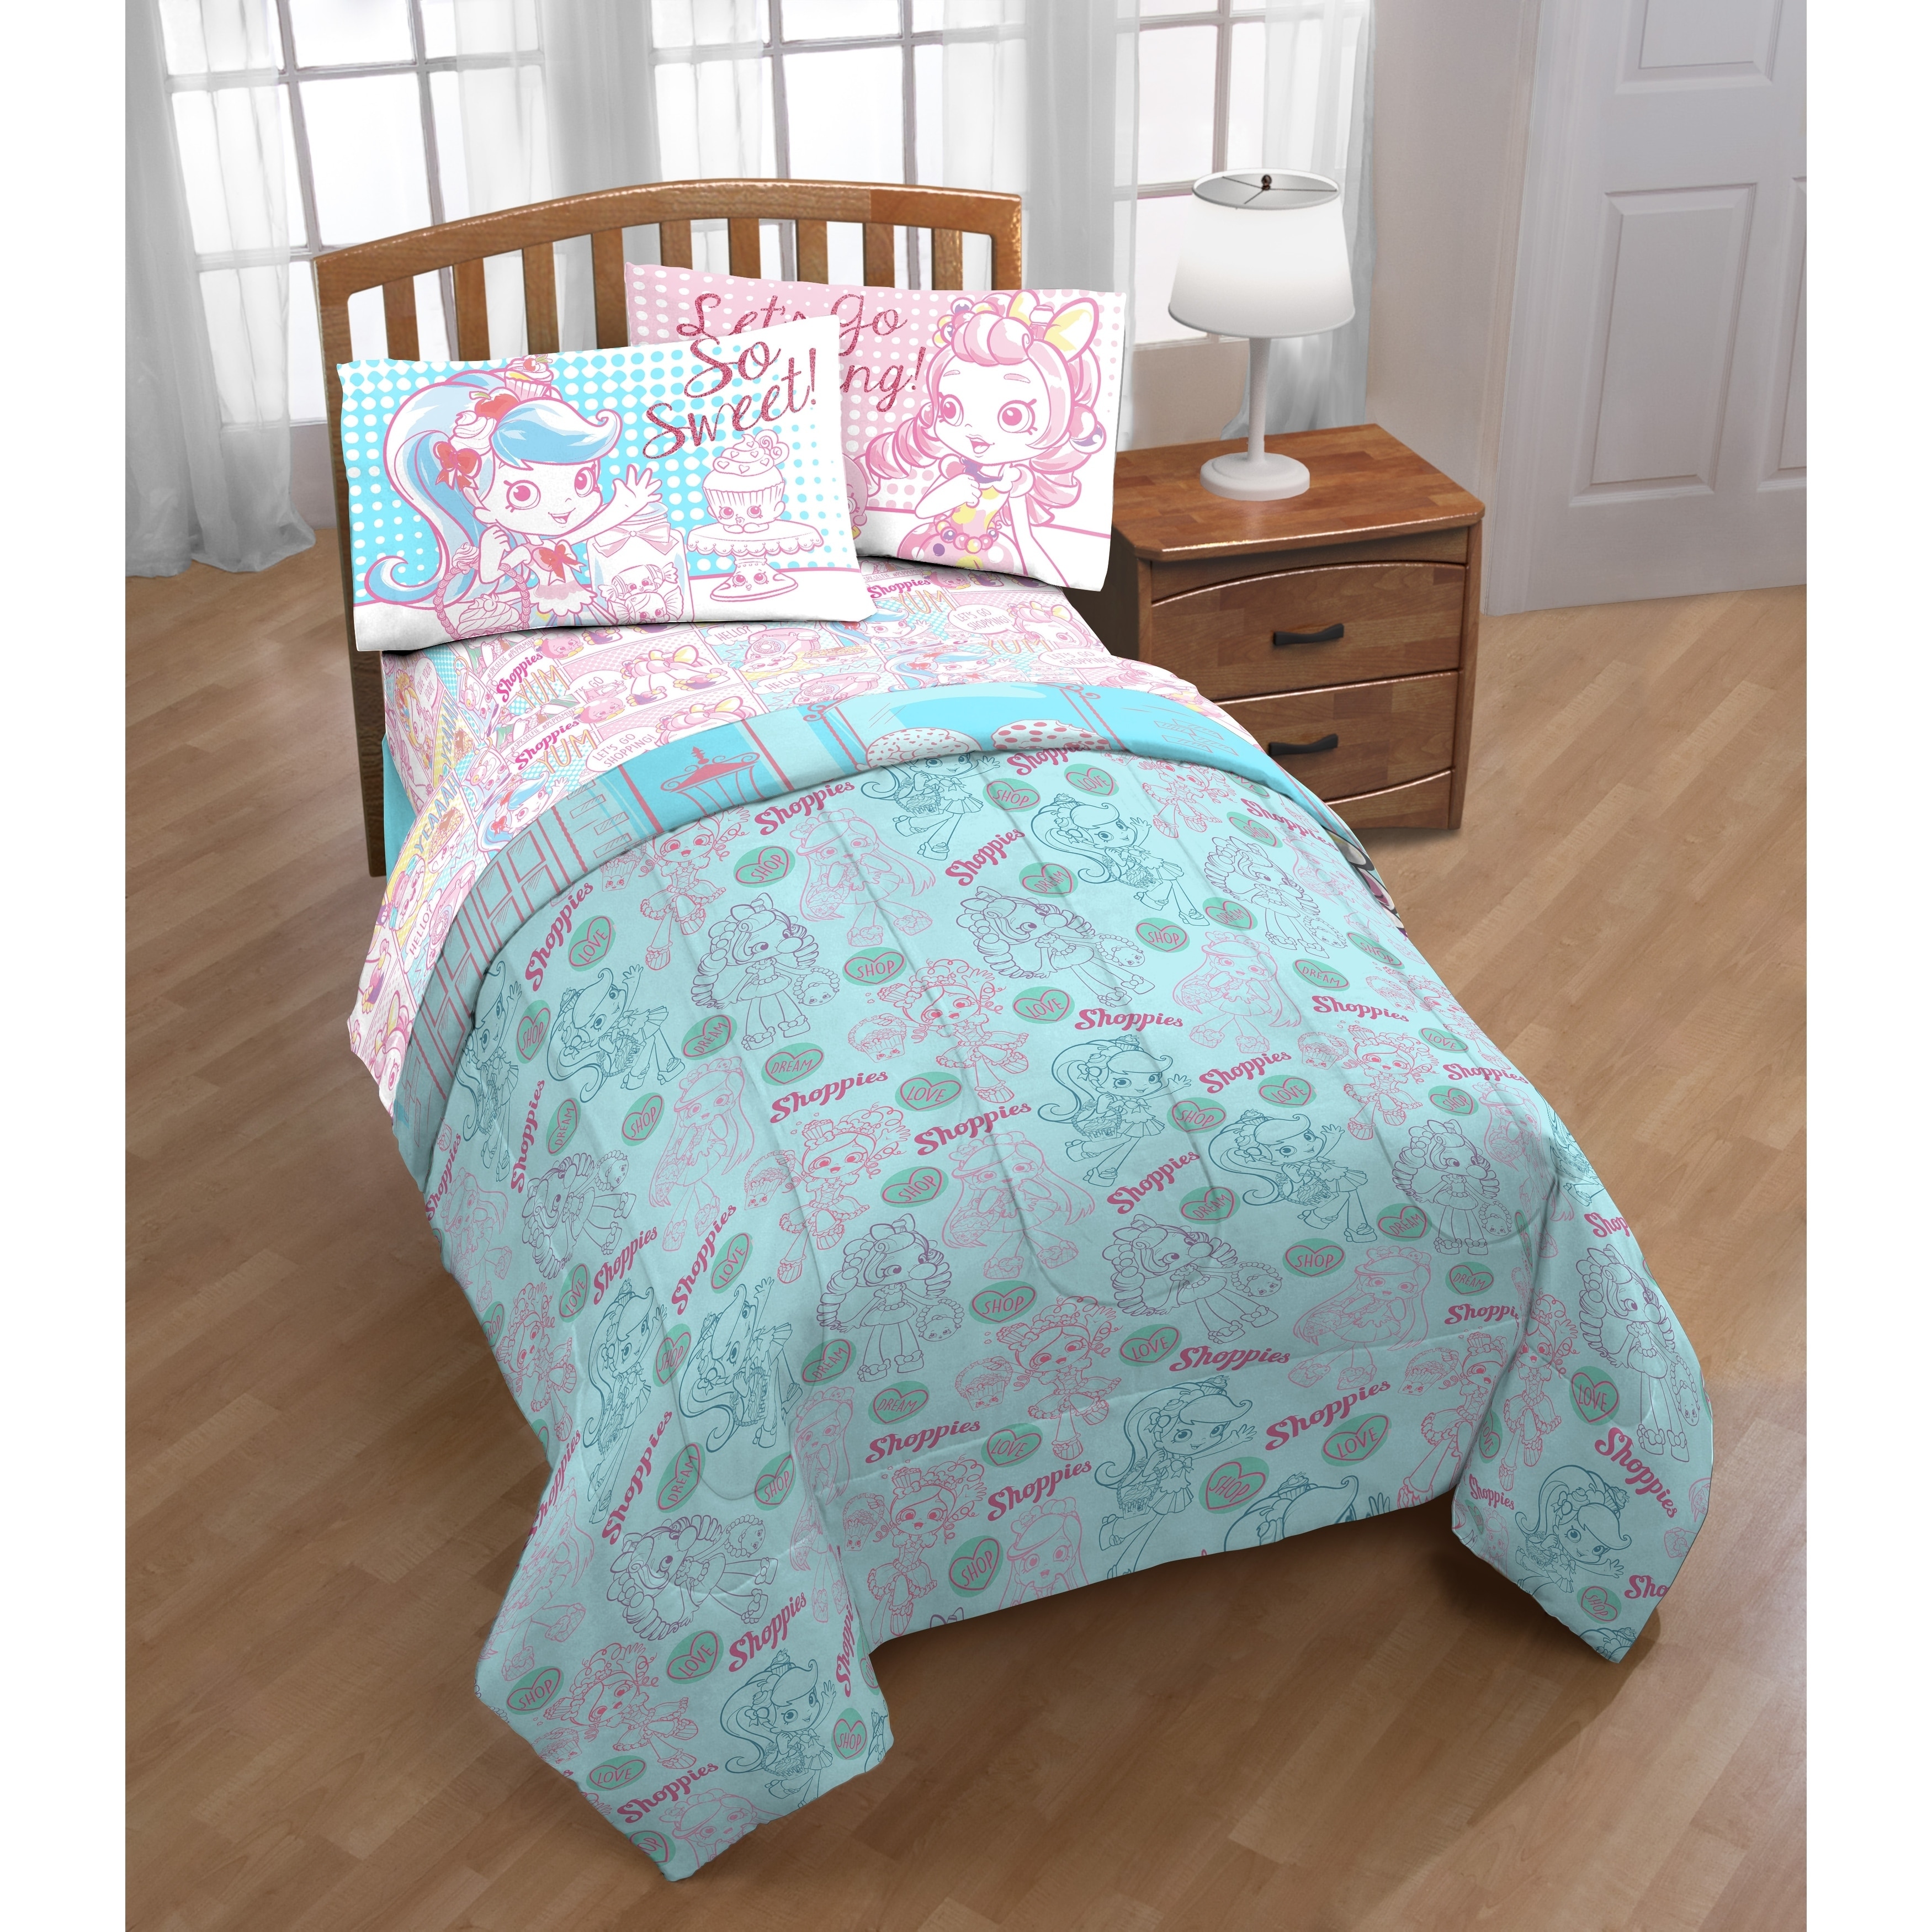 Shopkin Bed Set - Free shipping on orders of $35+ and save 5% every day